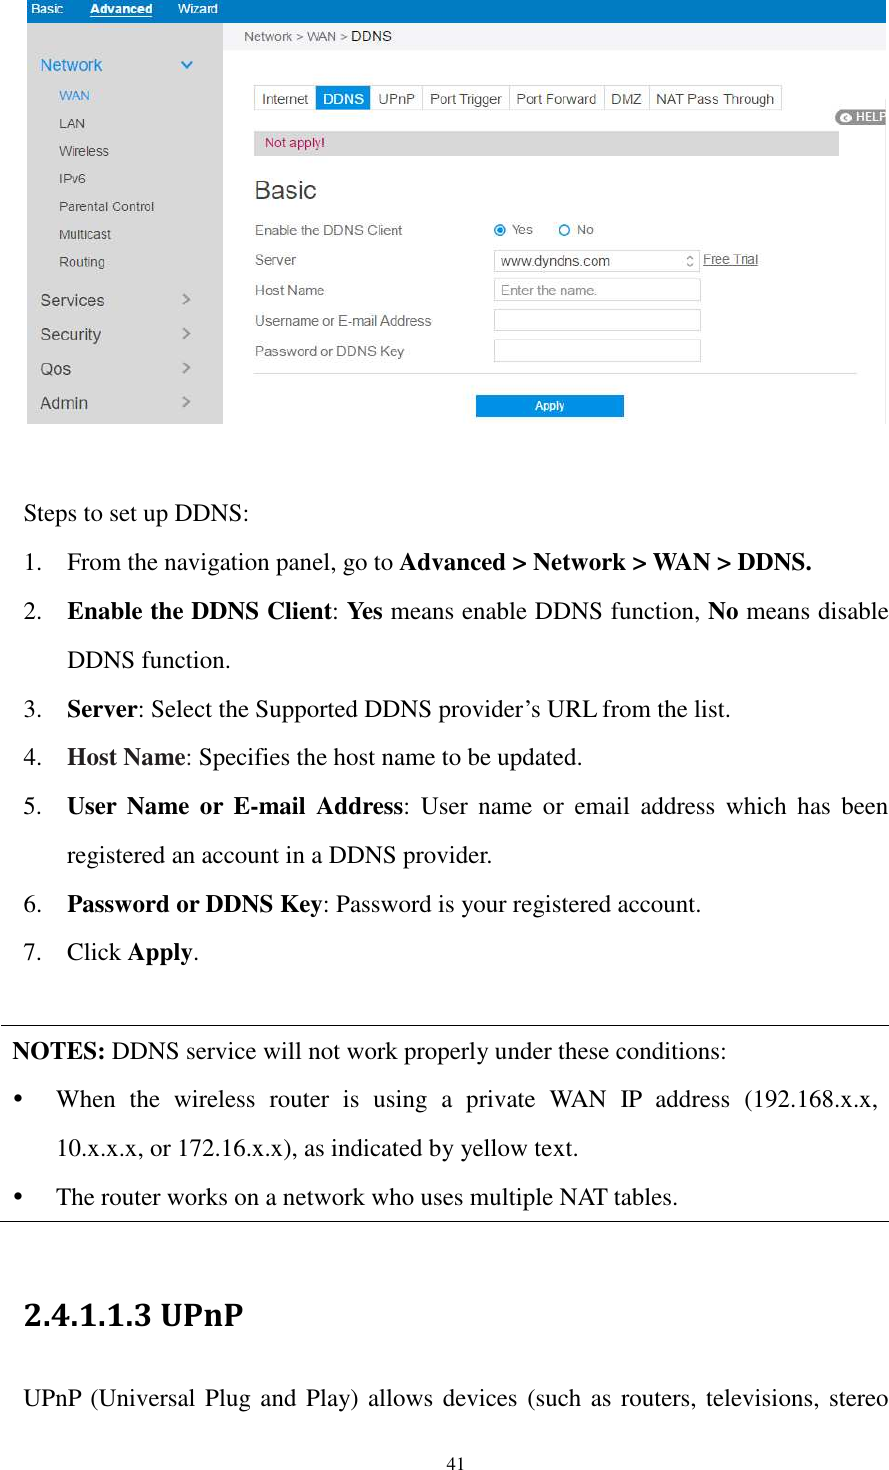  41   Steps to set up DDNS: 1. From the navigation panel, go to Advanced &gt; Network &gt; WAN &gt; DDNS. 2. Enable the DDNS Client: Yes means enable DDNS function, No means disable DDNS function. 3. Server: Select the Supported DDNS provider’s URL from the list. 4. Host Name: Specifies the host name to be updated. 5. User  Name  or E-mail  Address:  User  name  or  email  address  which  has  been registered an account in a DDNS provider. 6. Password or DDNS Key: Password is your registered account. 7. Click Apply.  NOTES: DDNS service will not work properly under these conditions:  When  the  wireless  router  is  using  a  private  WAN  IP  address  (192.168.x.x, 10.x.x.x, or 172.16.x.x), as indicated by yellow text.  The router works on a network who uses multiple NAT tables.  2.4.1.1.3 UPnP   UPnP (Universal Plug and Play) allows devices (such as routers, televisions, stereo 